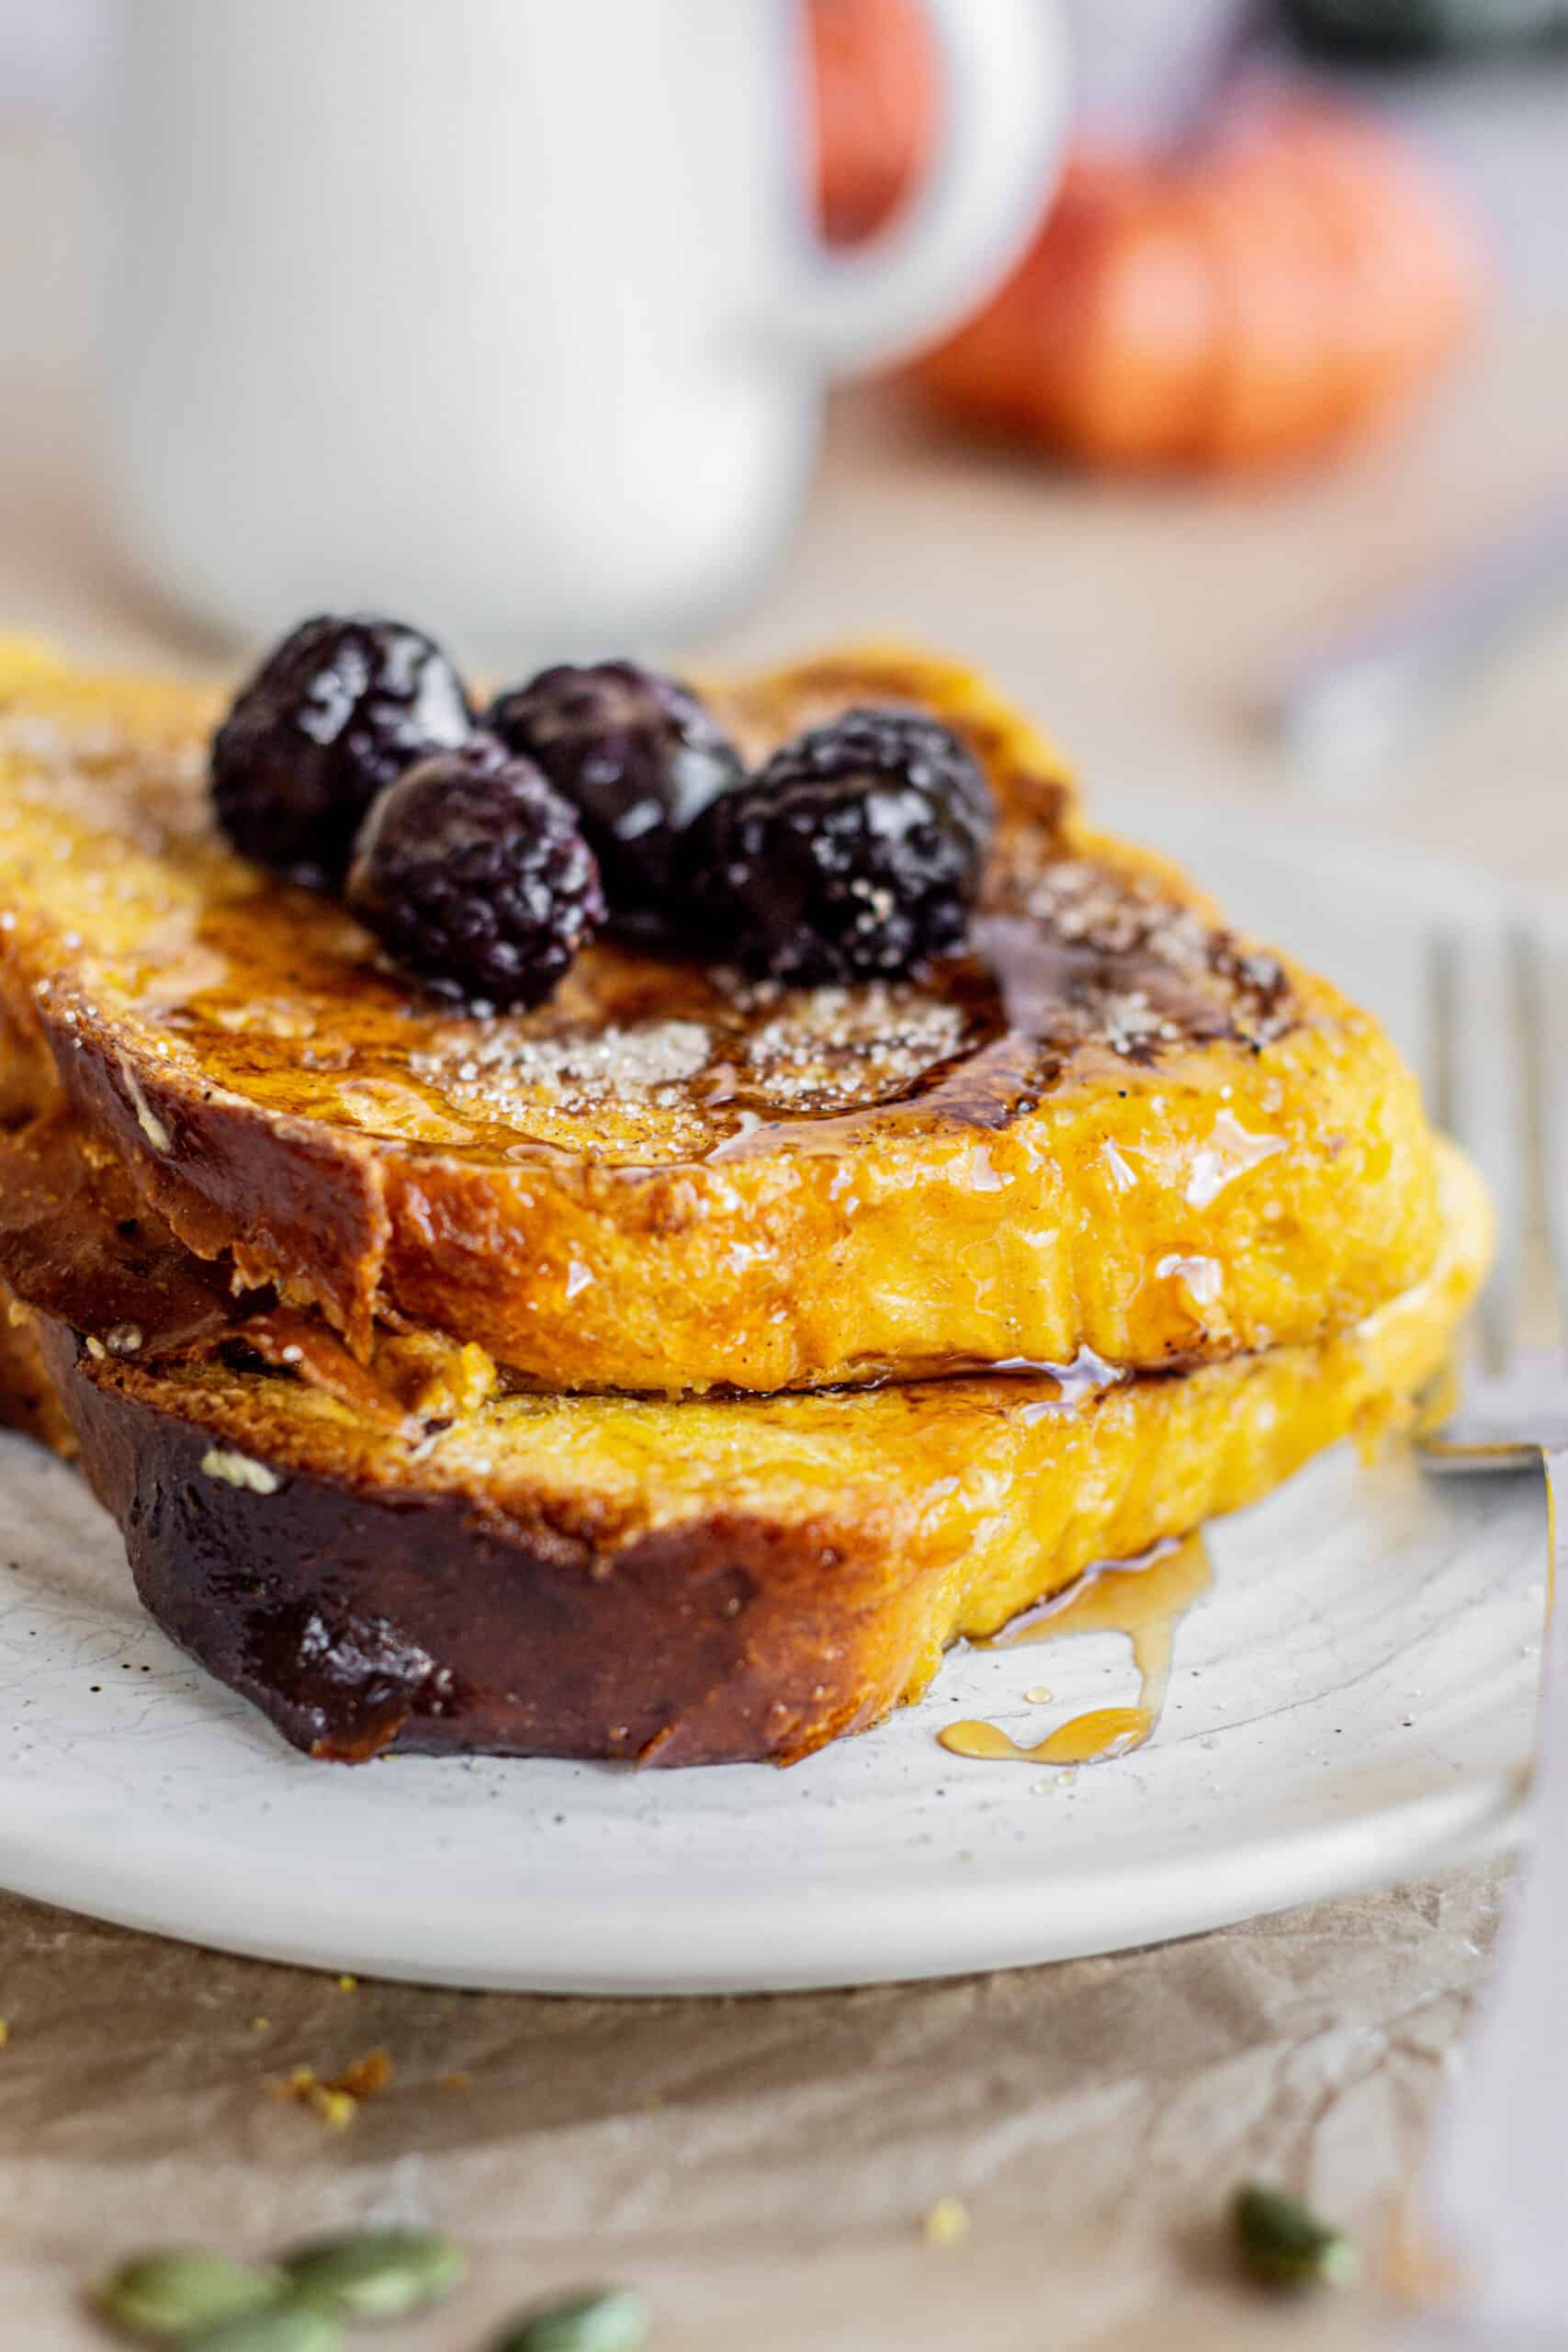 Golden pumpkin French toast topped with glistening blackberries and drizzled syrup, served on a white plate with a blurred white mug in the background.